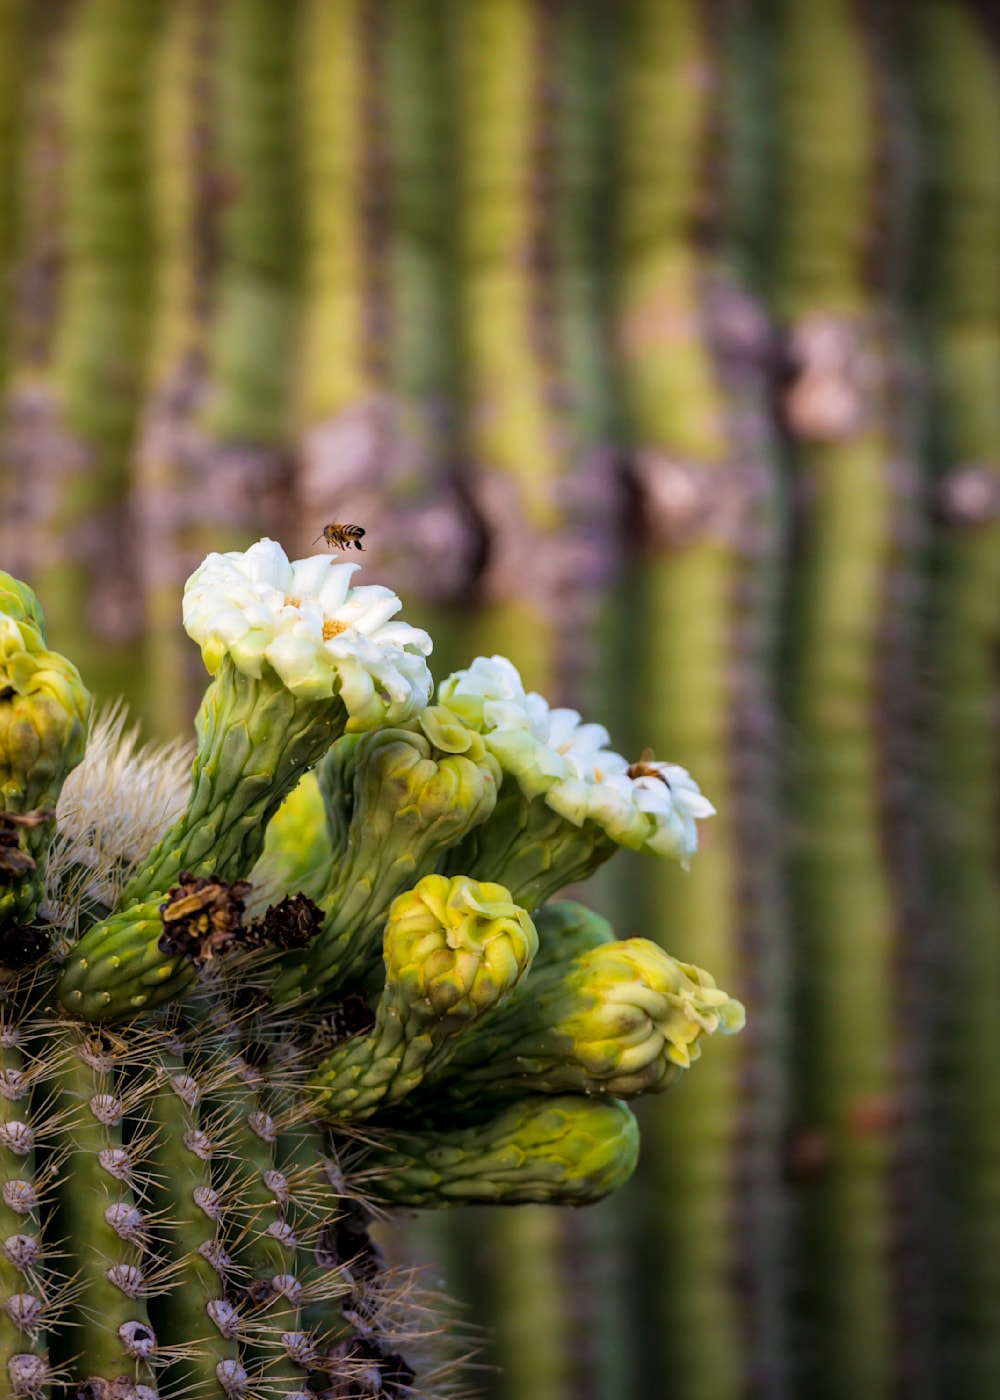 Bees pollinating a saguaro flower.